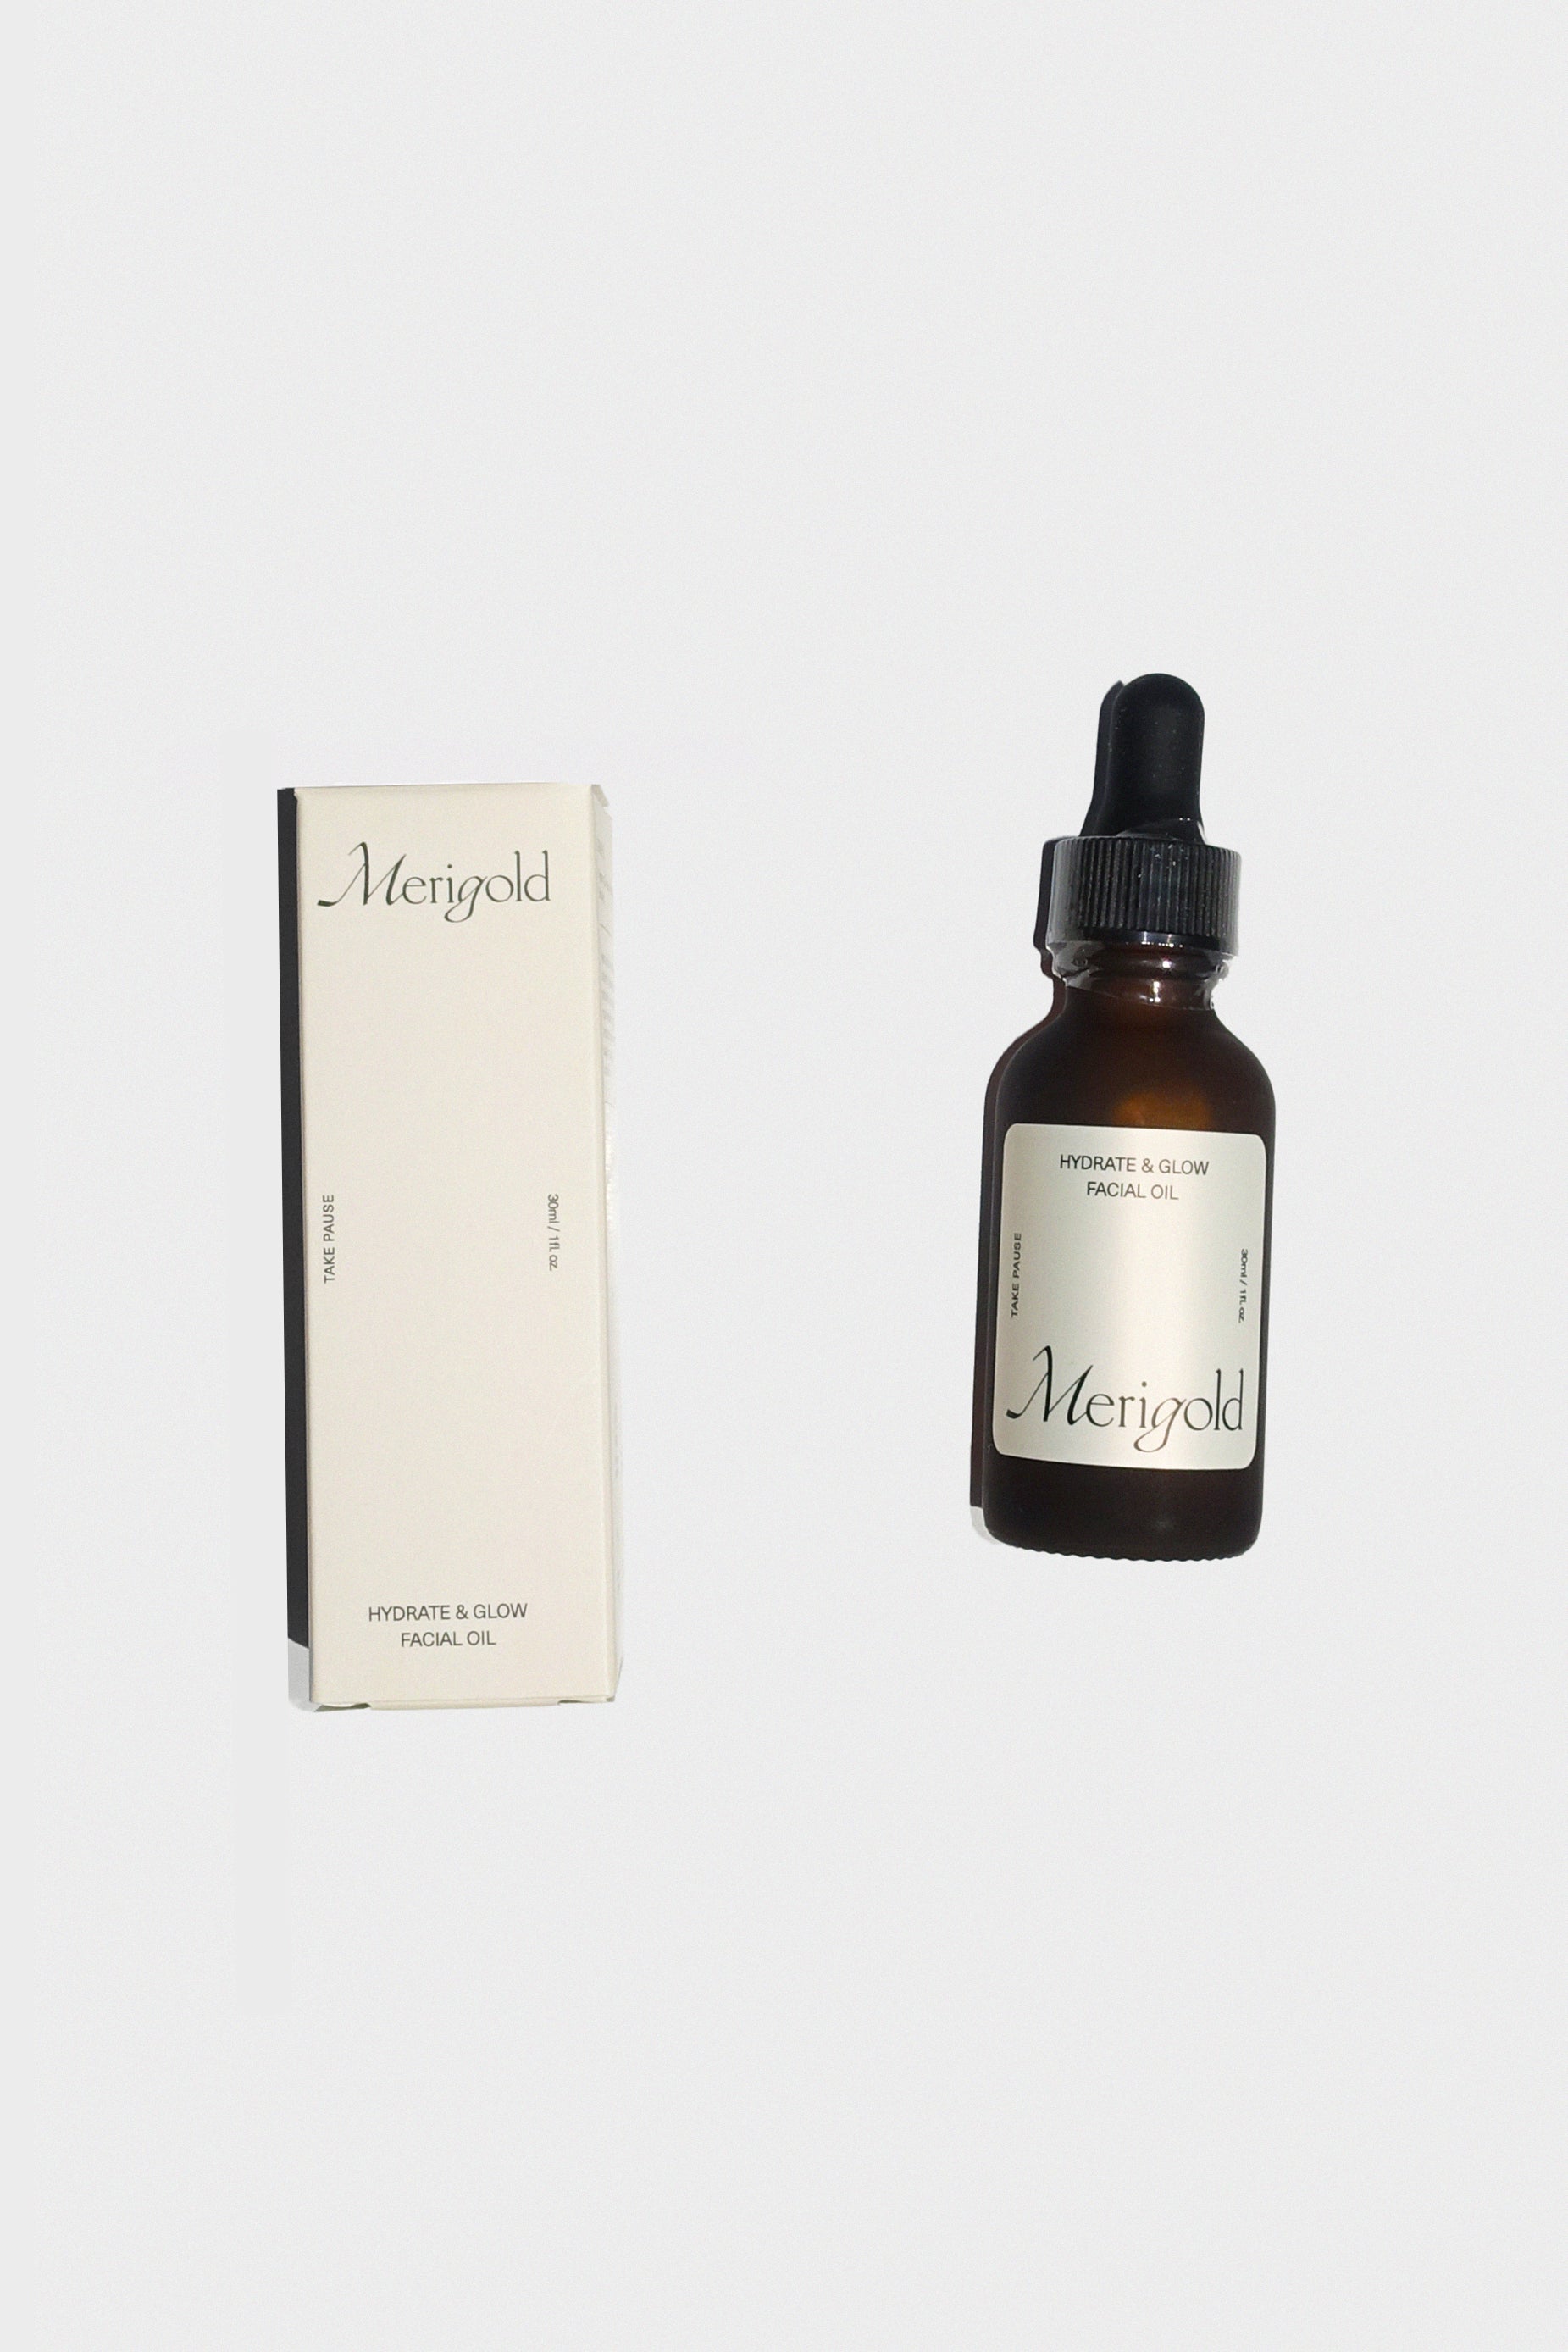 Hydrate & Glow Facial Oil by Merigold